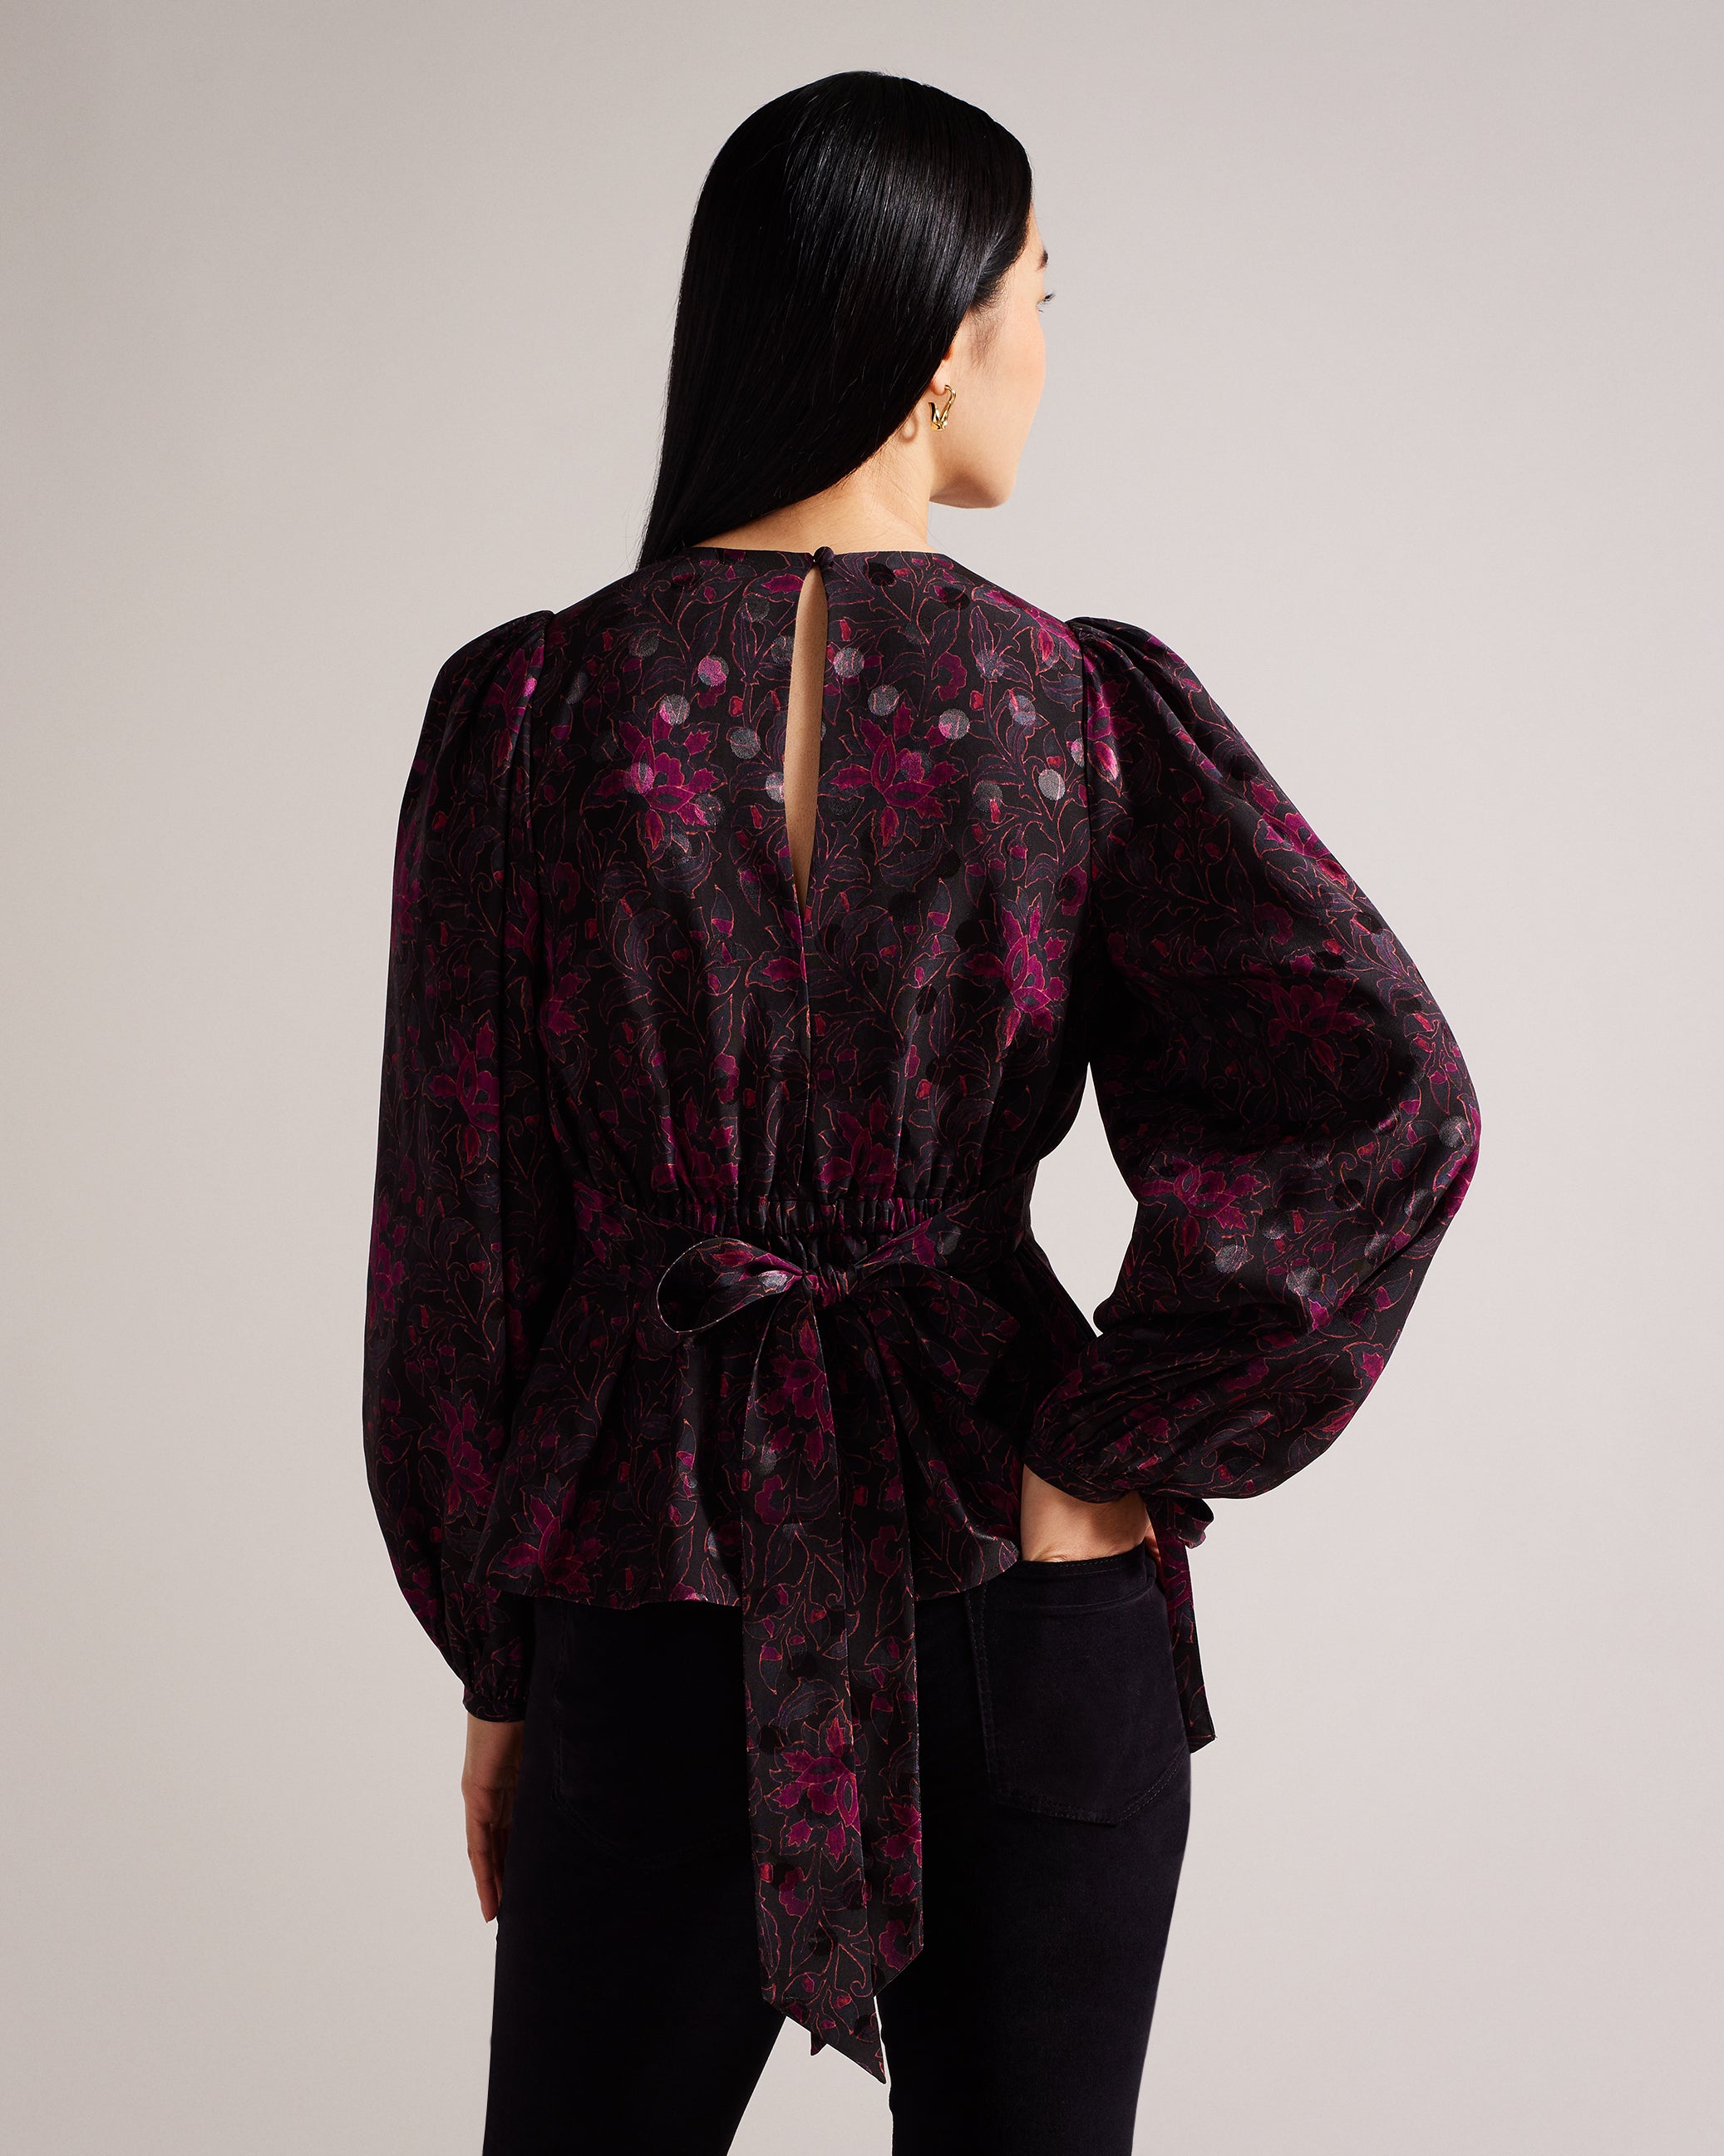 Terre Printed Peplum Top With Cuffed Sleeves